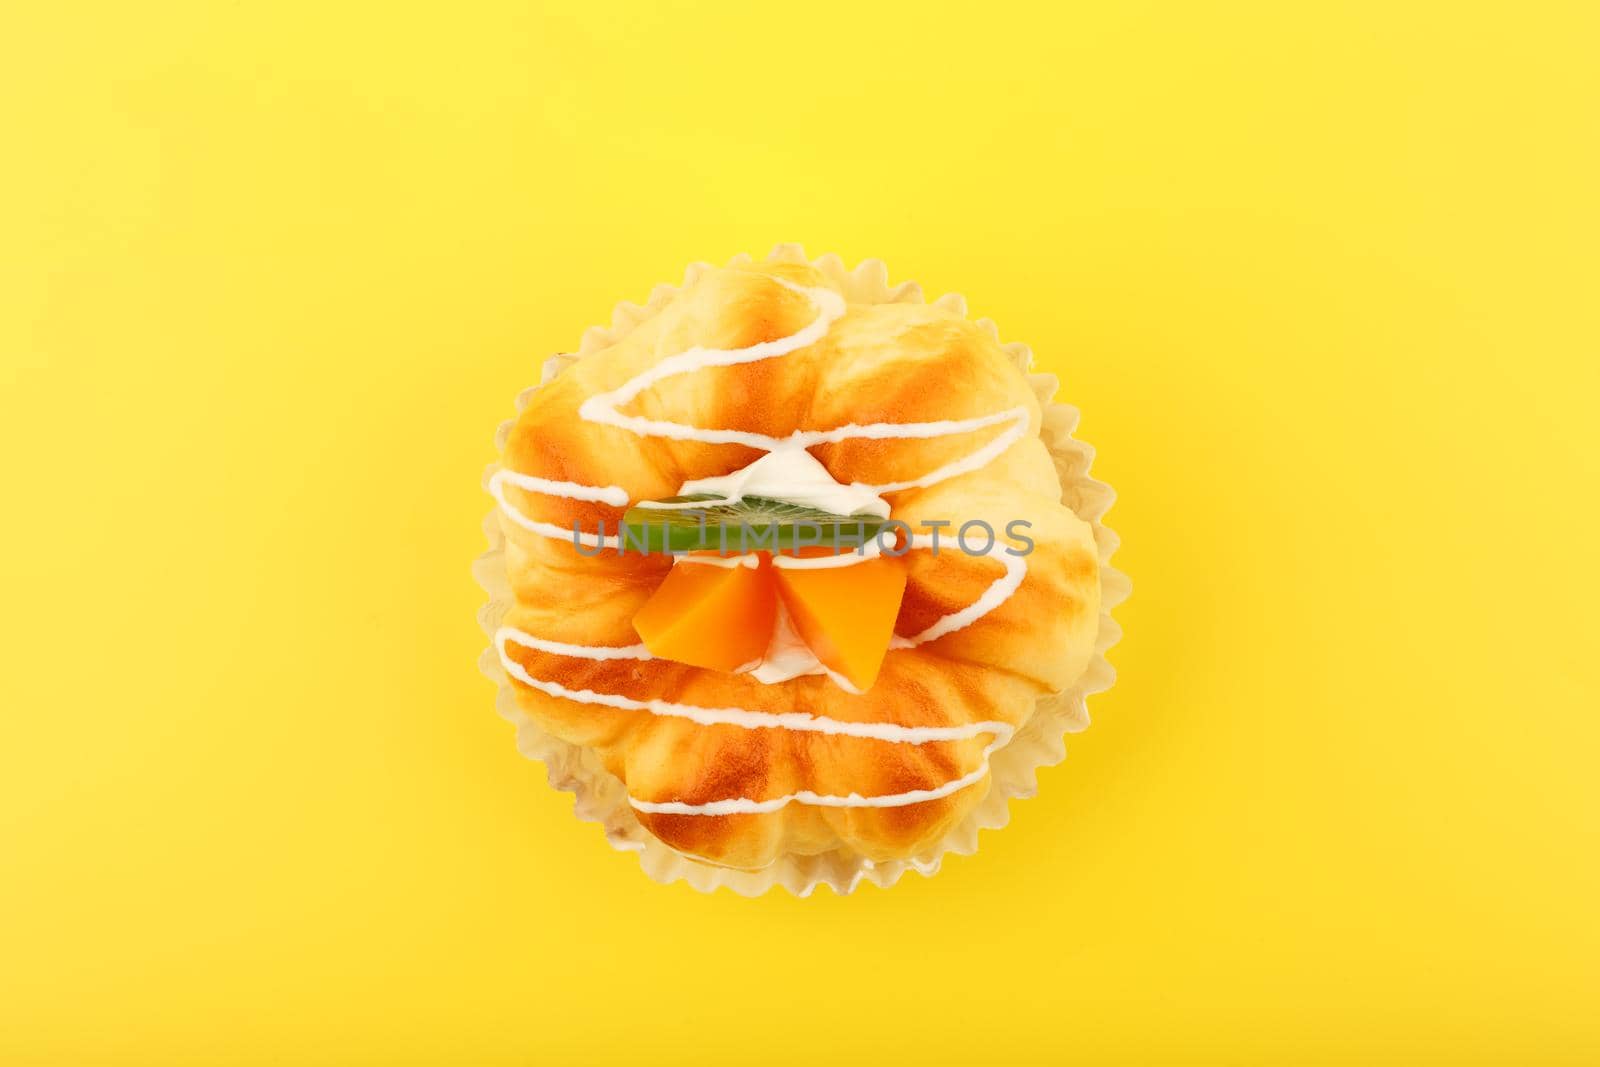 Top view of cupcake with pieces of peaches and kiwi fruit and cream against yellow background. Creative concept of desserts and sweet food